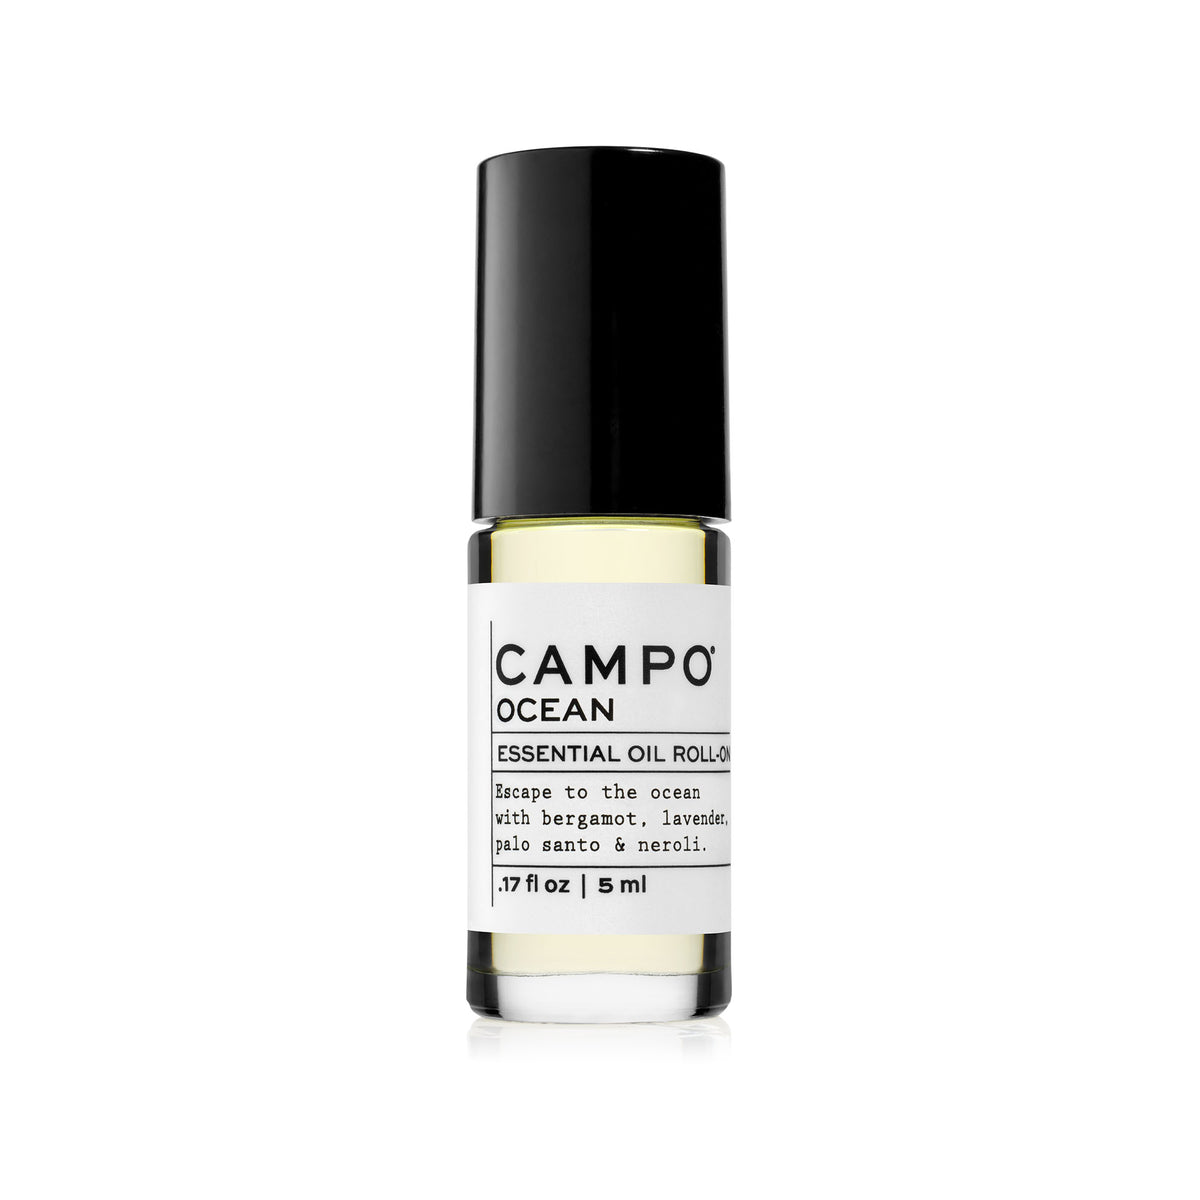 Campo Beauty OCEAN Essential Oil Roll-On in 5 ml. Escape to the ocean with this 100% pure essential oil blend of neroli, palo santo, lavender, and bergamot. Inspired by walks on the beach with orange blossoms in your hair, coastal lavender &amp; driftwood from the sea.